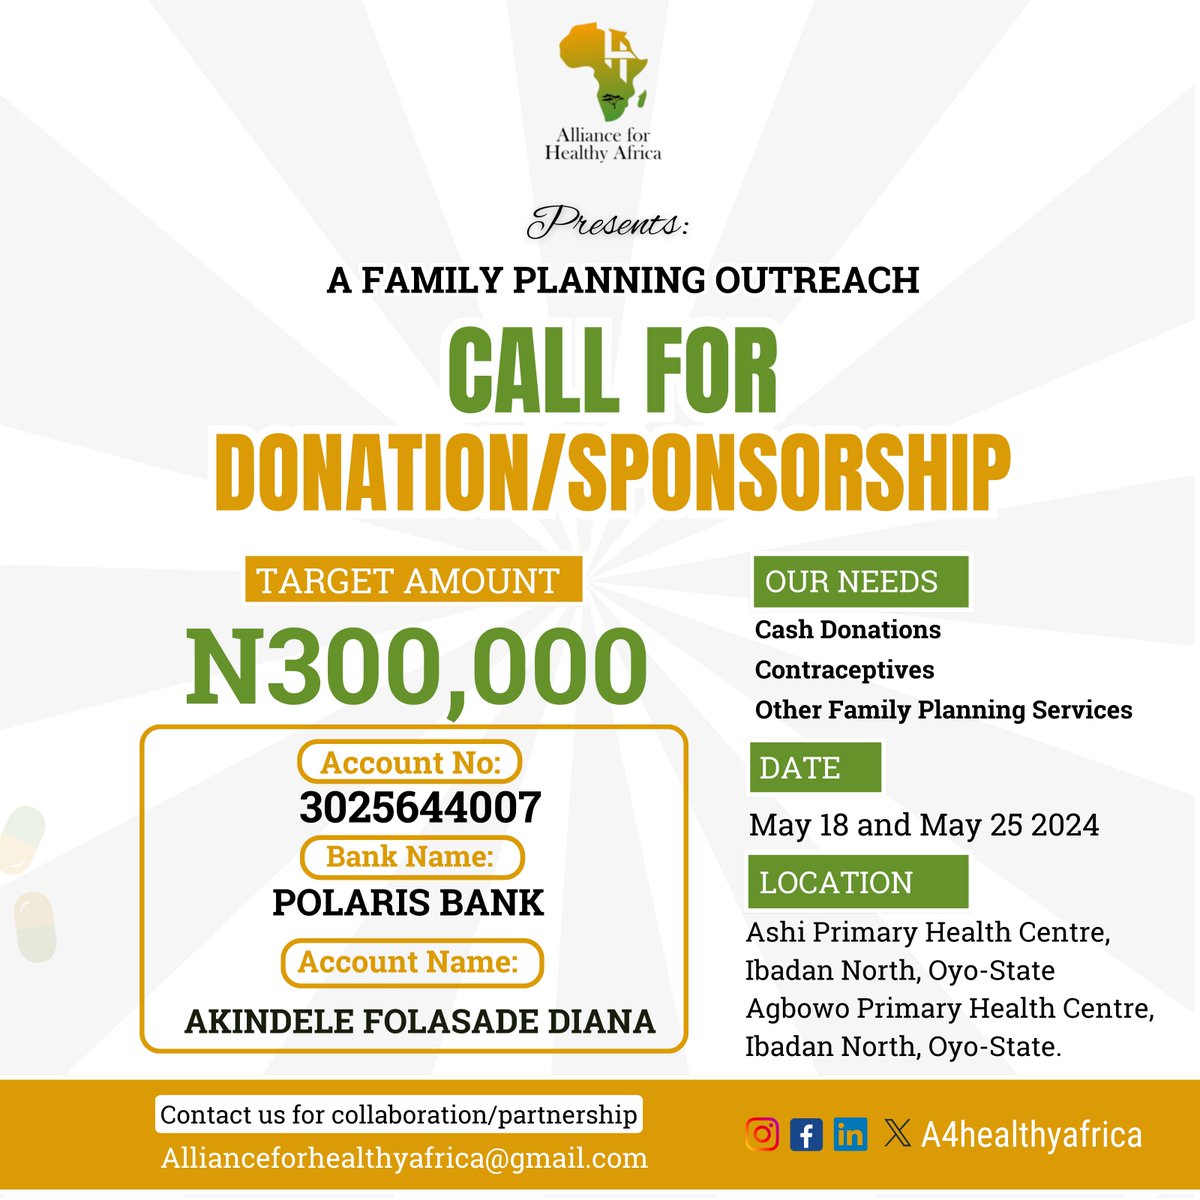 📢CALL FOR DONATION/SPONSORSHIP

Join us in empowering 100+ young girls and women with family-planning products and services on the 18th and 25th of May by giving
✅Cash Donations
✅Contraceptives
✅Family Planning Educational Materials

📍Ibadan

#TakeAction #FamilyPlanning